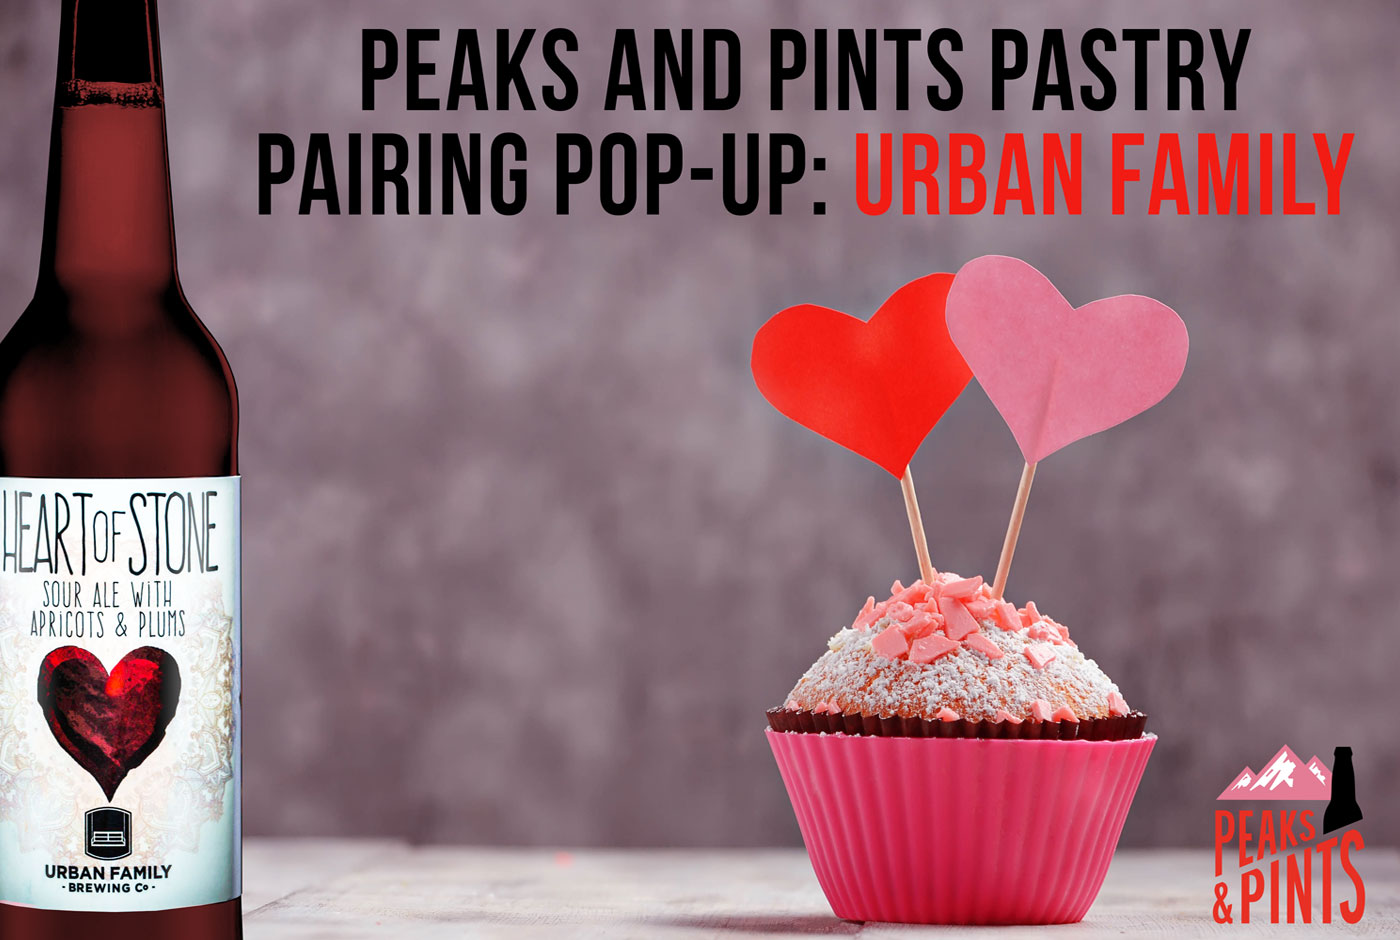 Peaks-and-Pints-Pastry-Pairing-Pop-up-Urban-Family-calendar